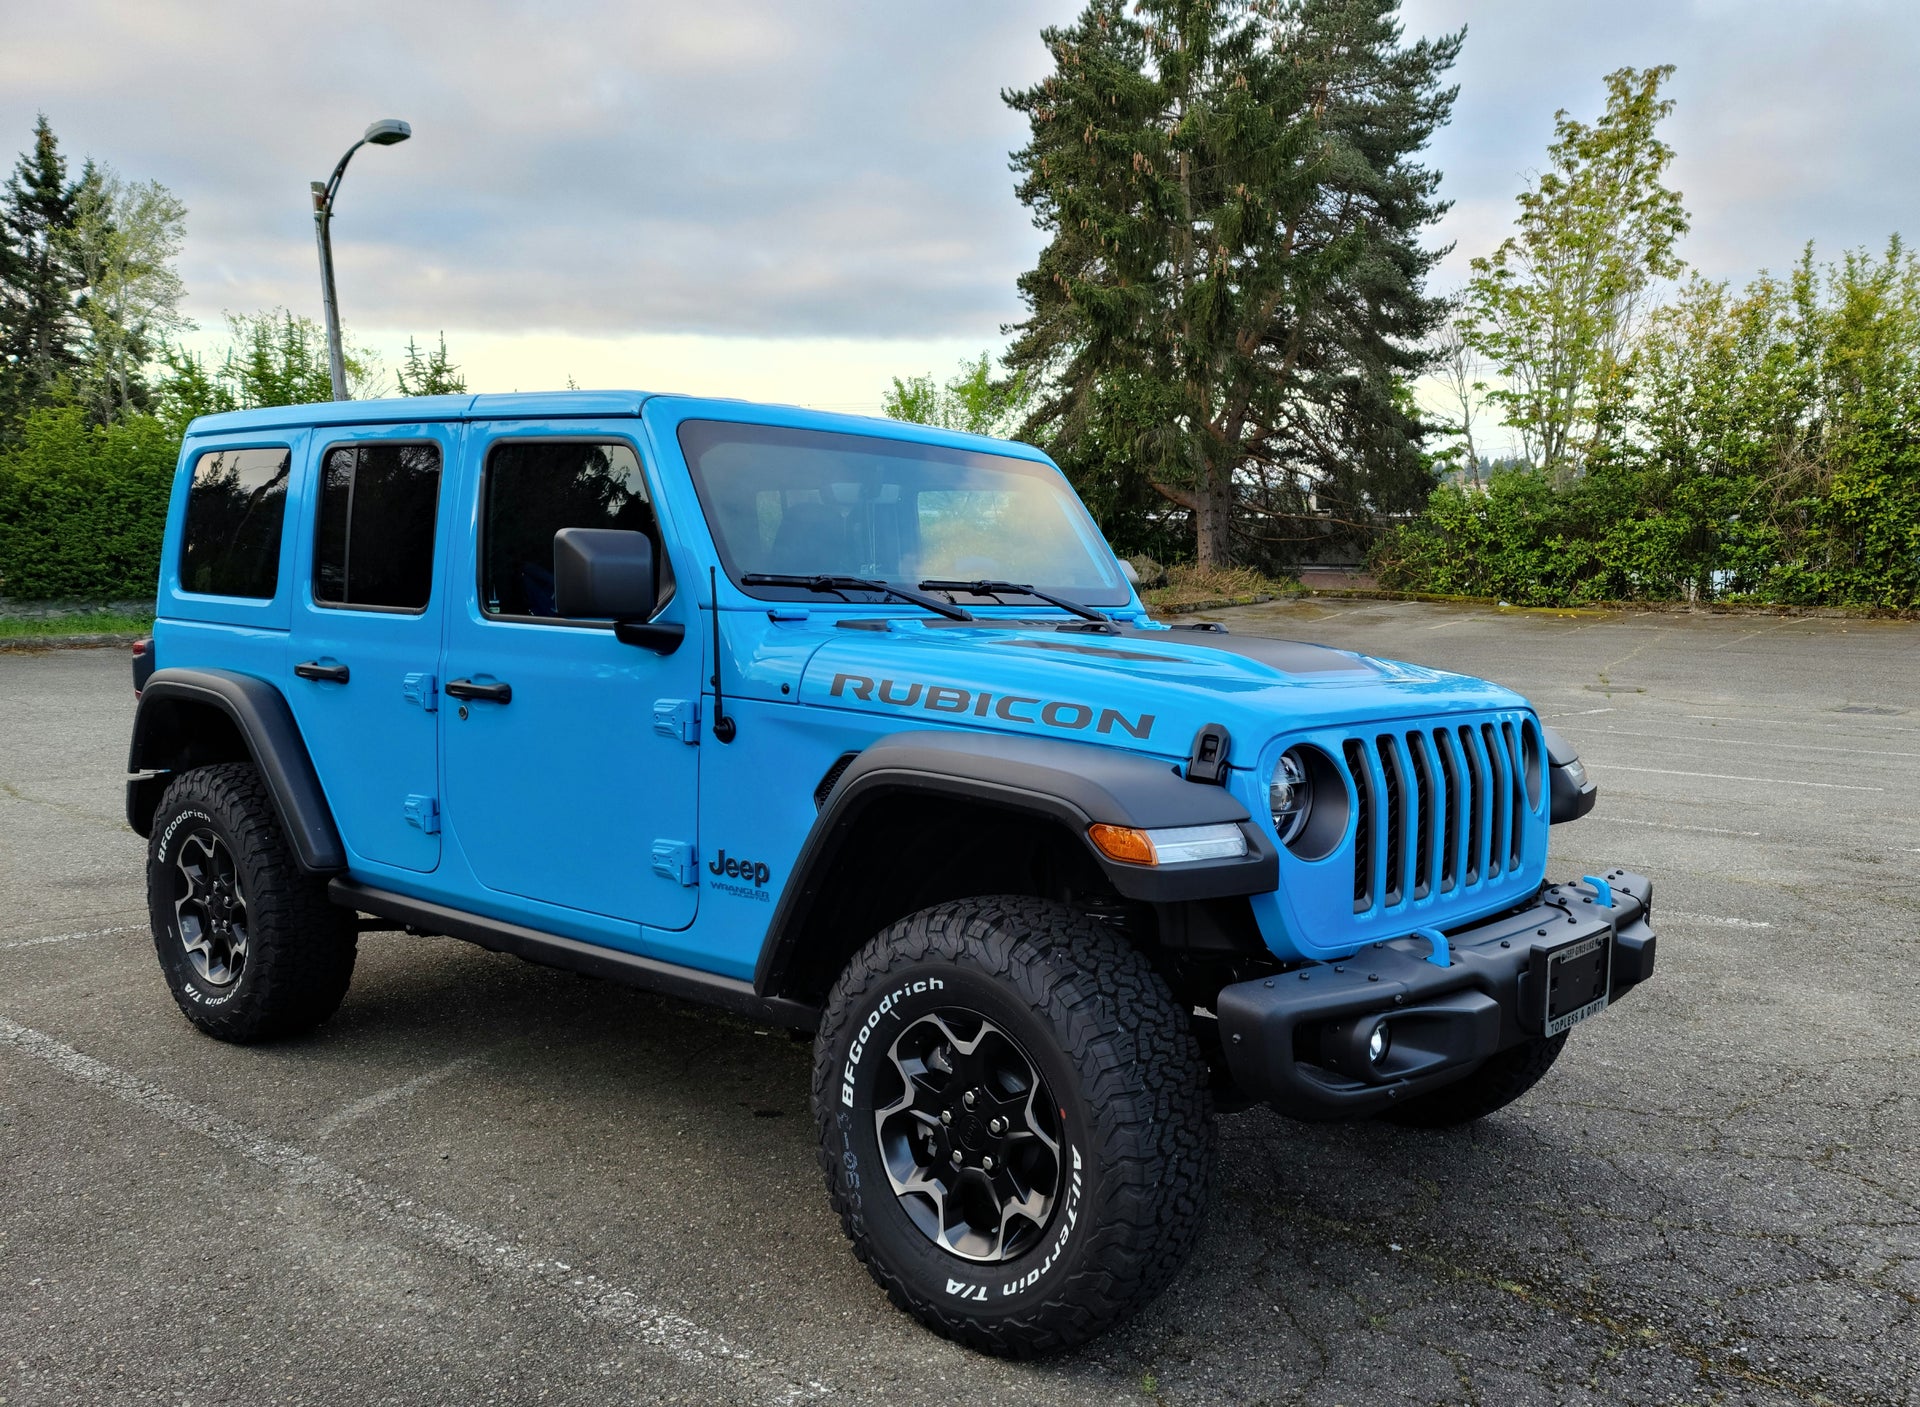 Chief Jeep Wrangler 4xe Owners Picture Thread Jeep Wrangler 4xe Forum